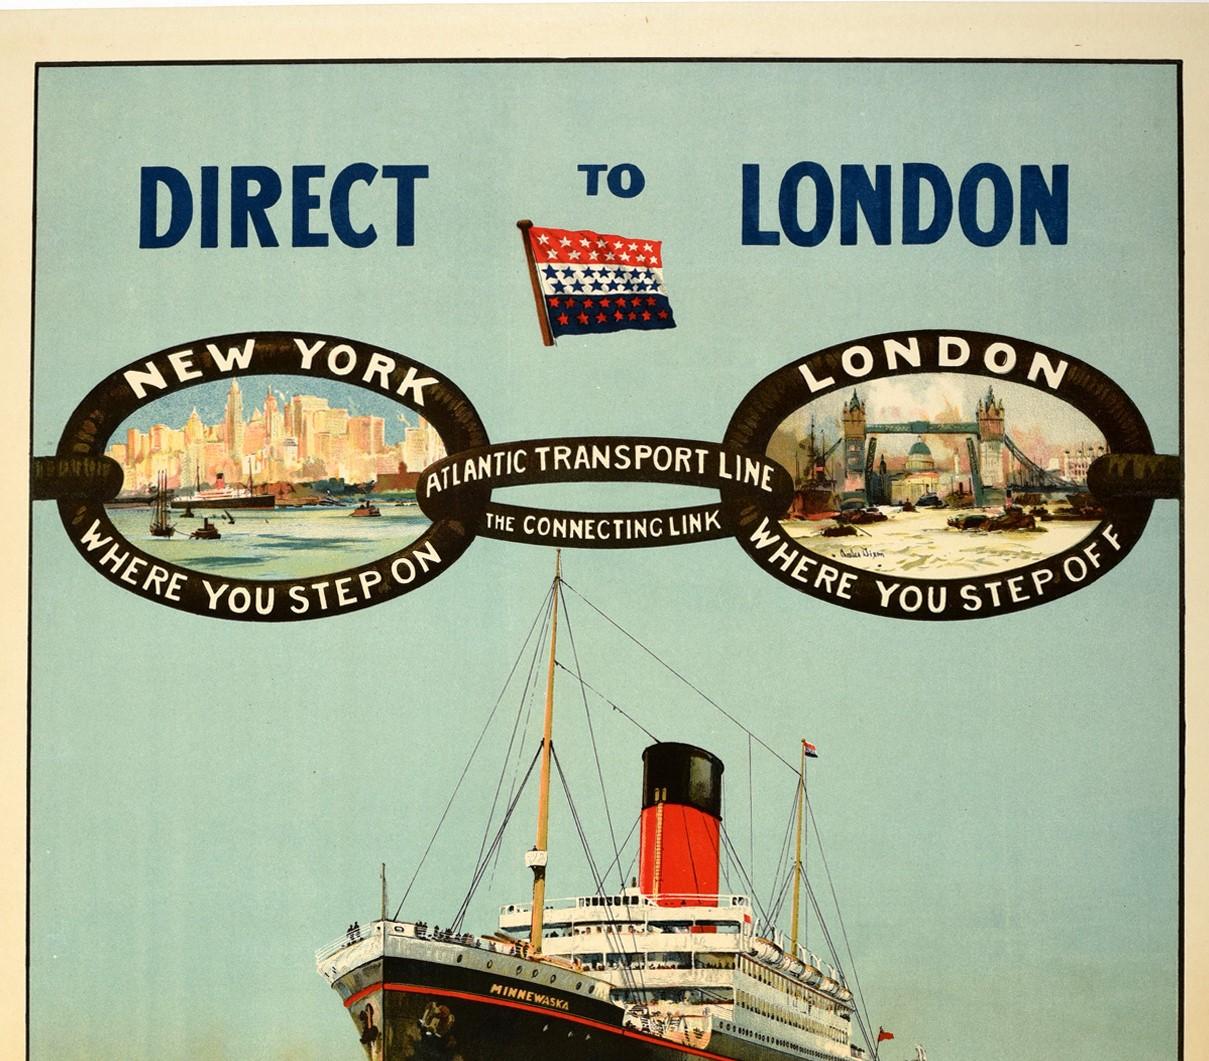 Original vintage poster featuring a great design of a cruise ship at sea with a red white and blue star flag between the bold text Direct To London above a chain link against the sky depicting two small images of New York skyscrapers and a ship in